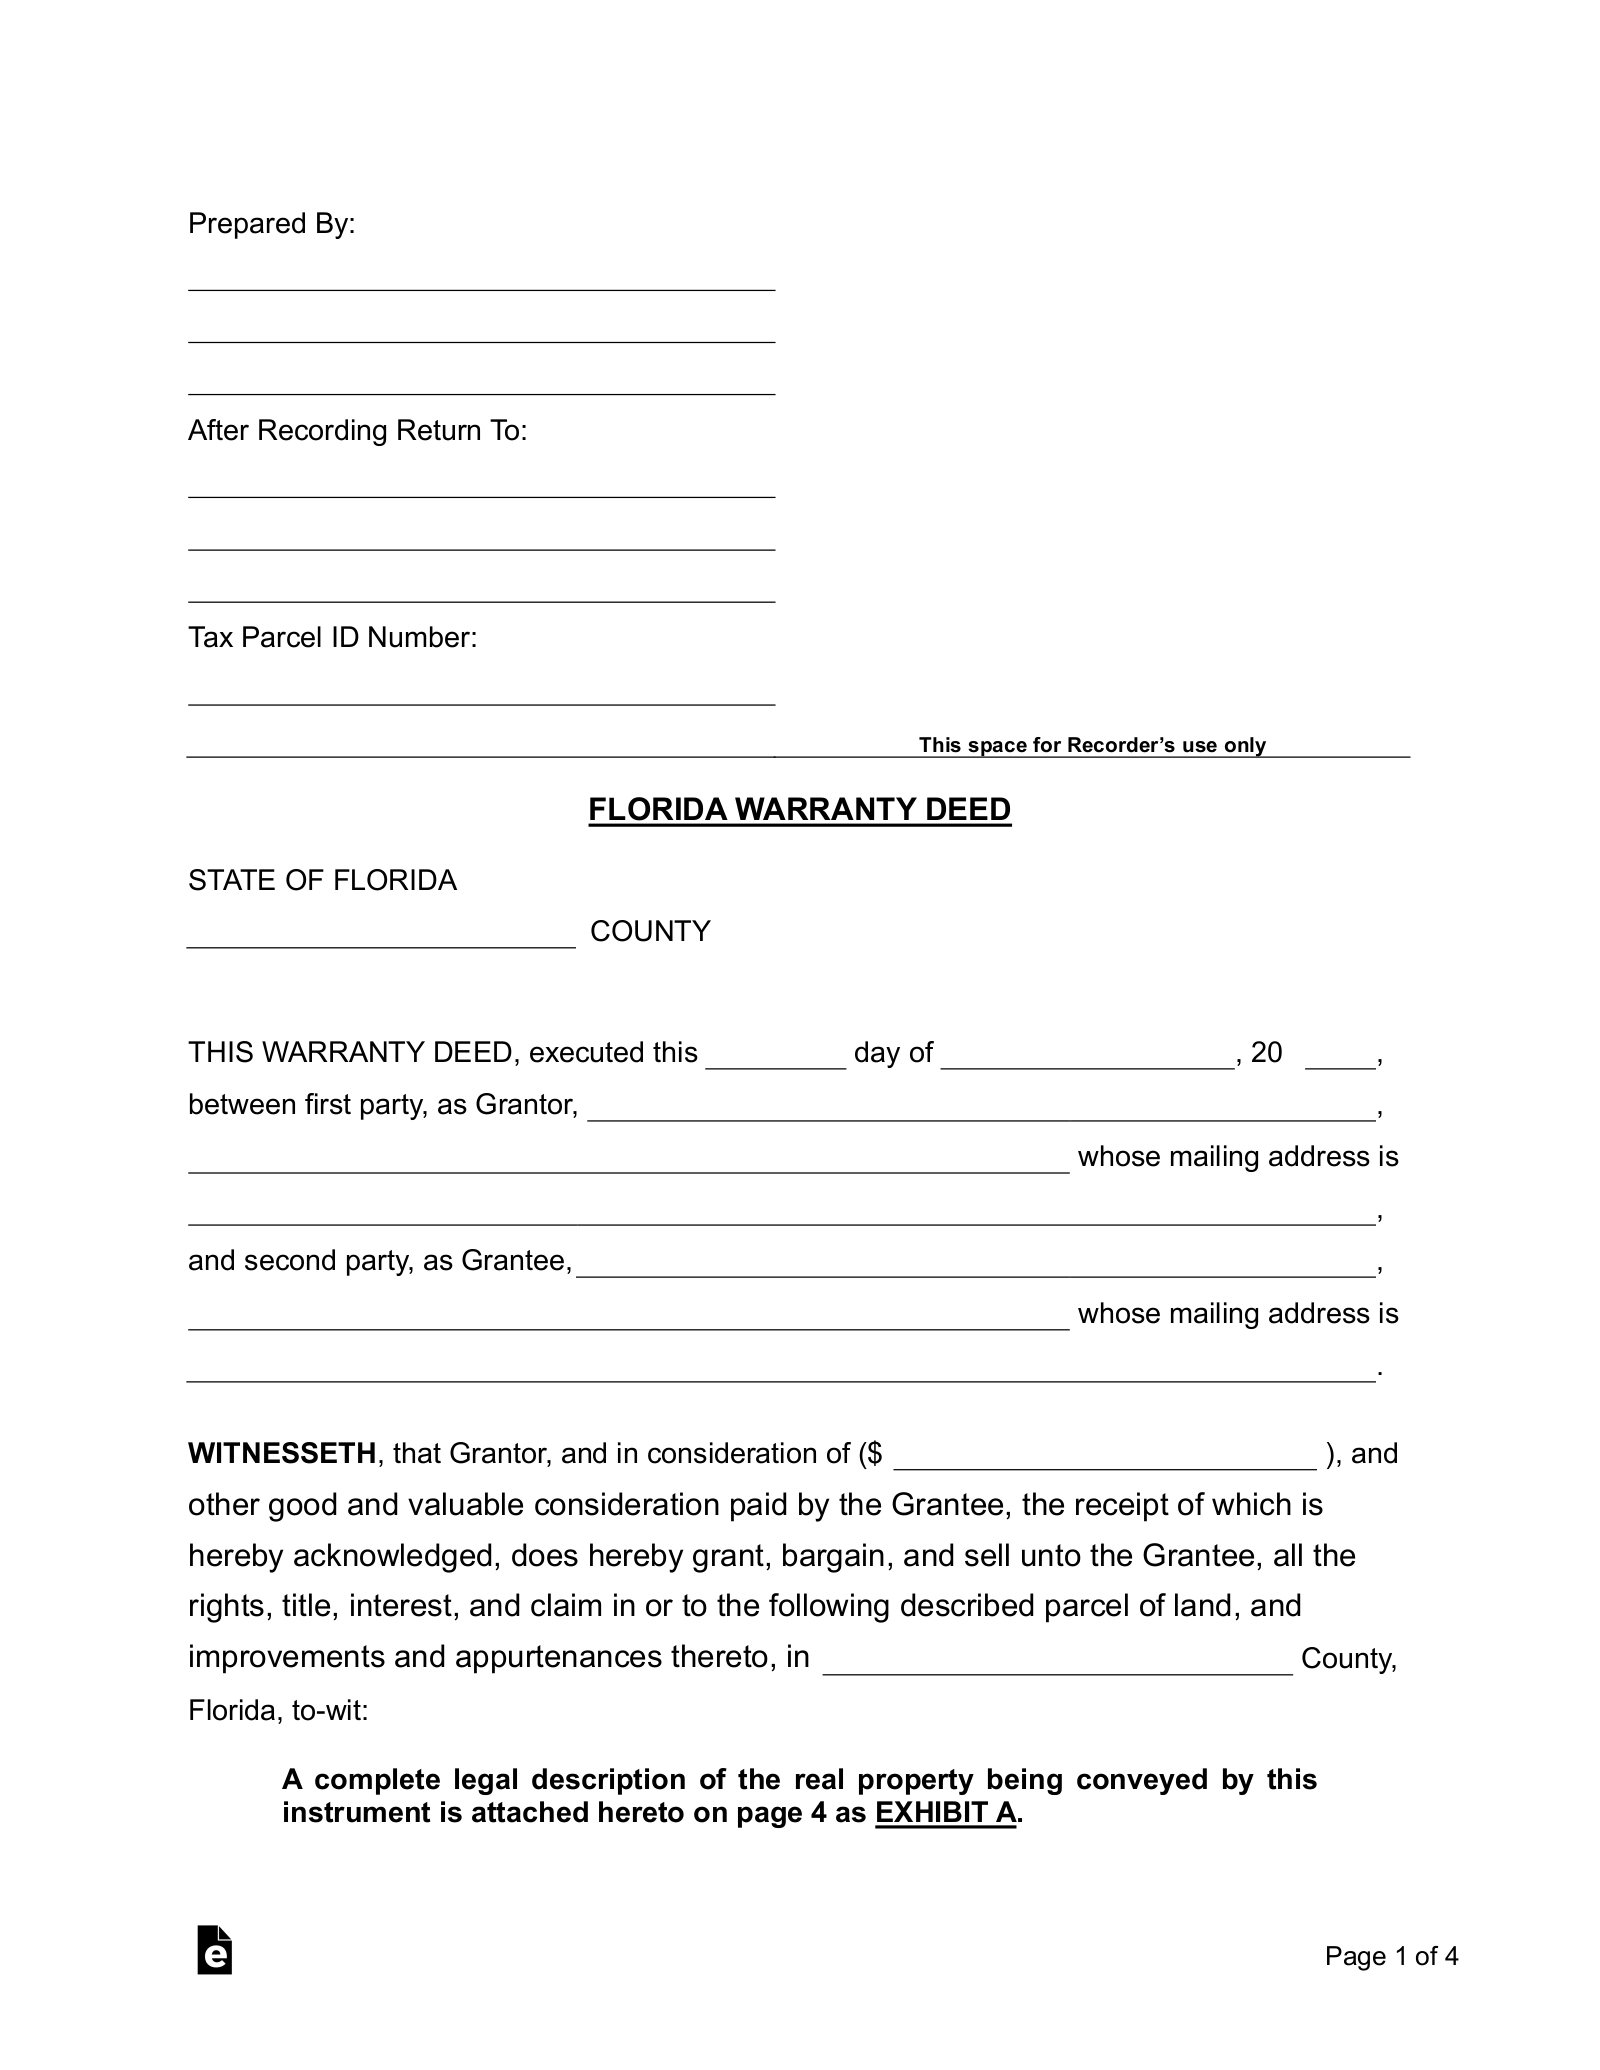 free-printable-warranty-deed-forms-florida-printable-forms-free-online